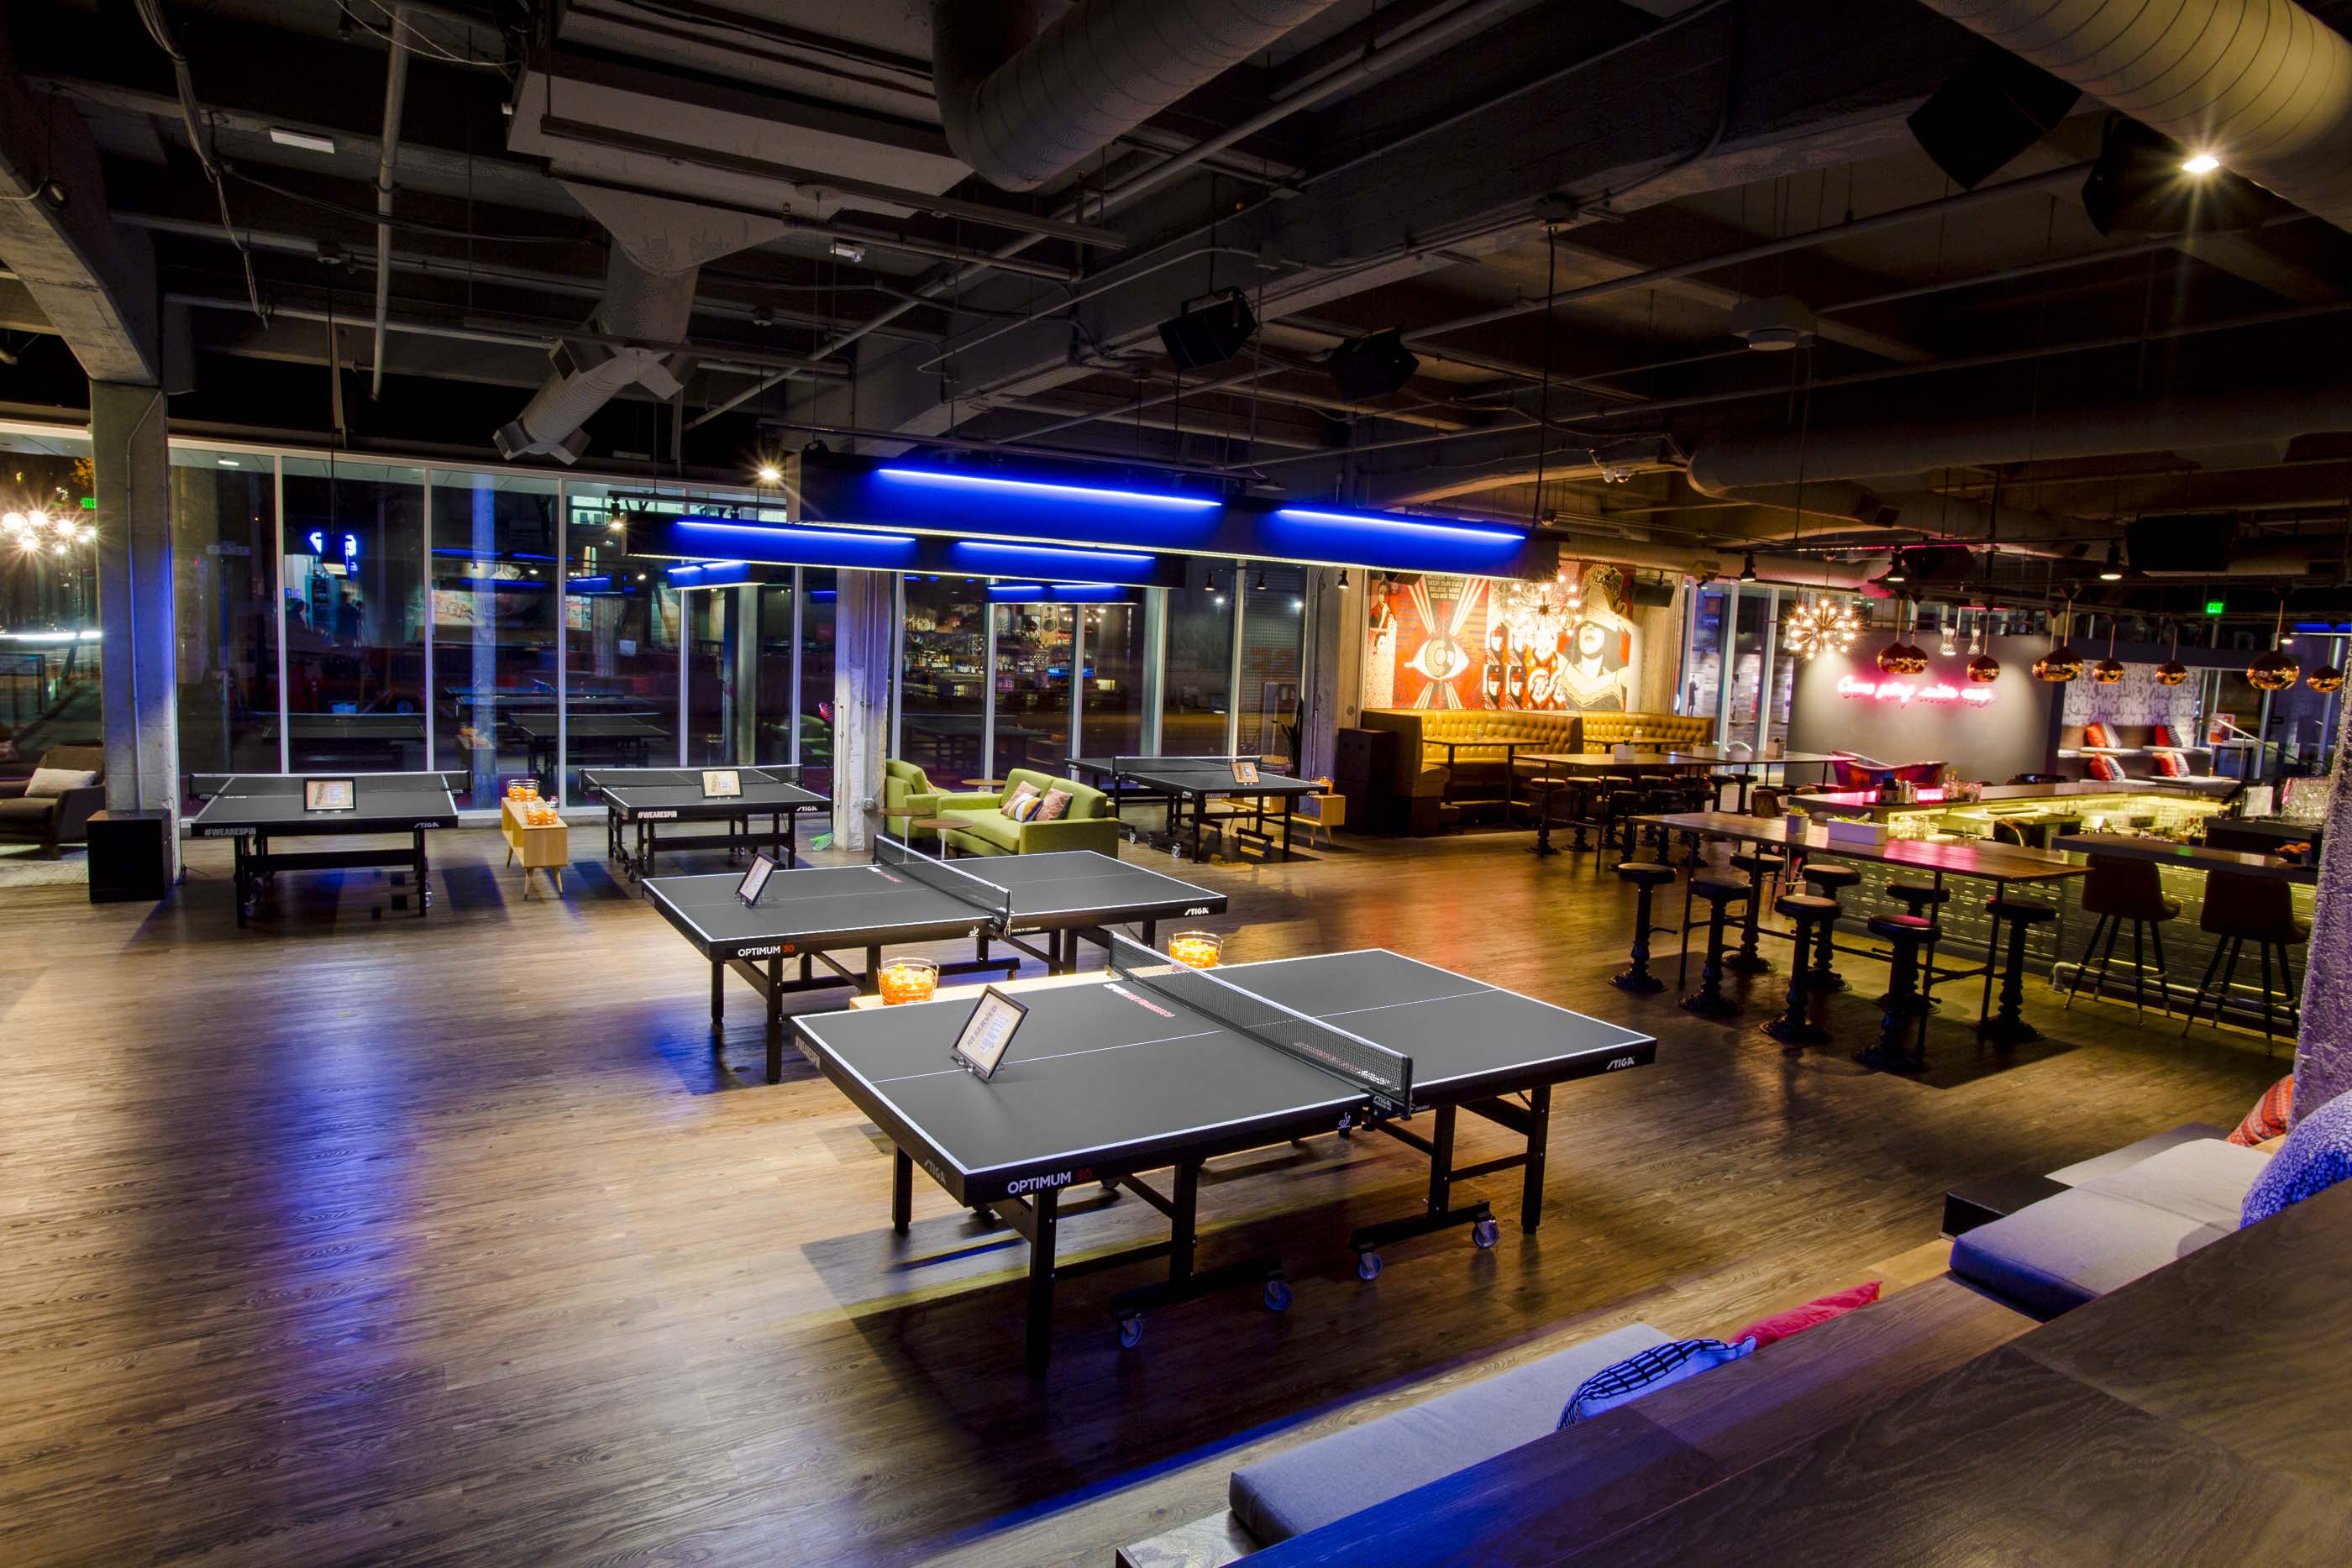 SPIN is a pingpong lounge in San Franciso's SoMa neighborhood.